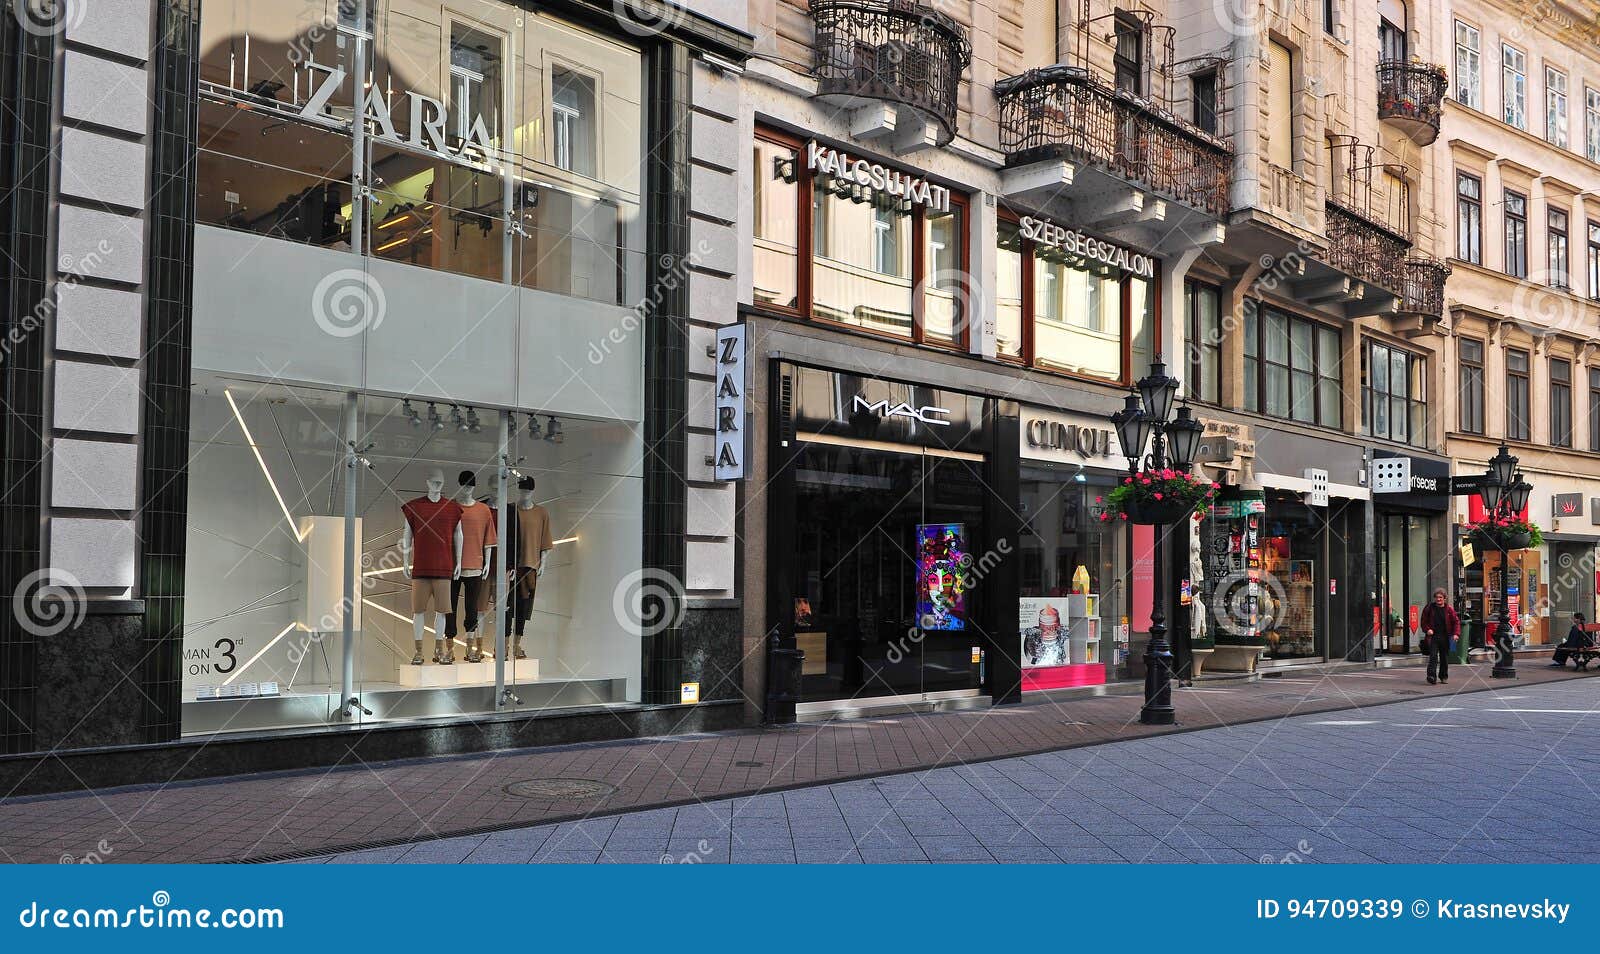 En begivenhed Egypten garn View of Clothes Store in Vaci Shopping Street, Budapest Editorial Stock  Image - Image of brand, urban: 94709339